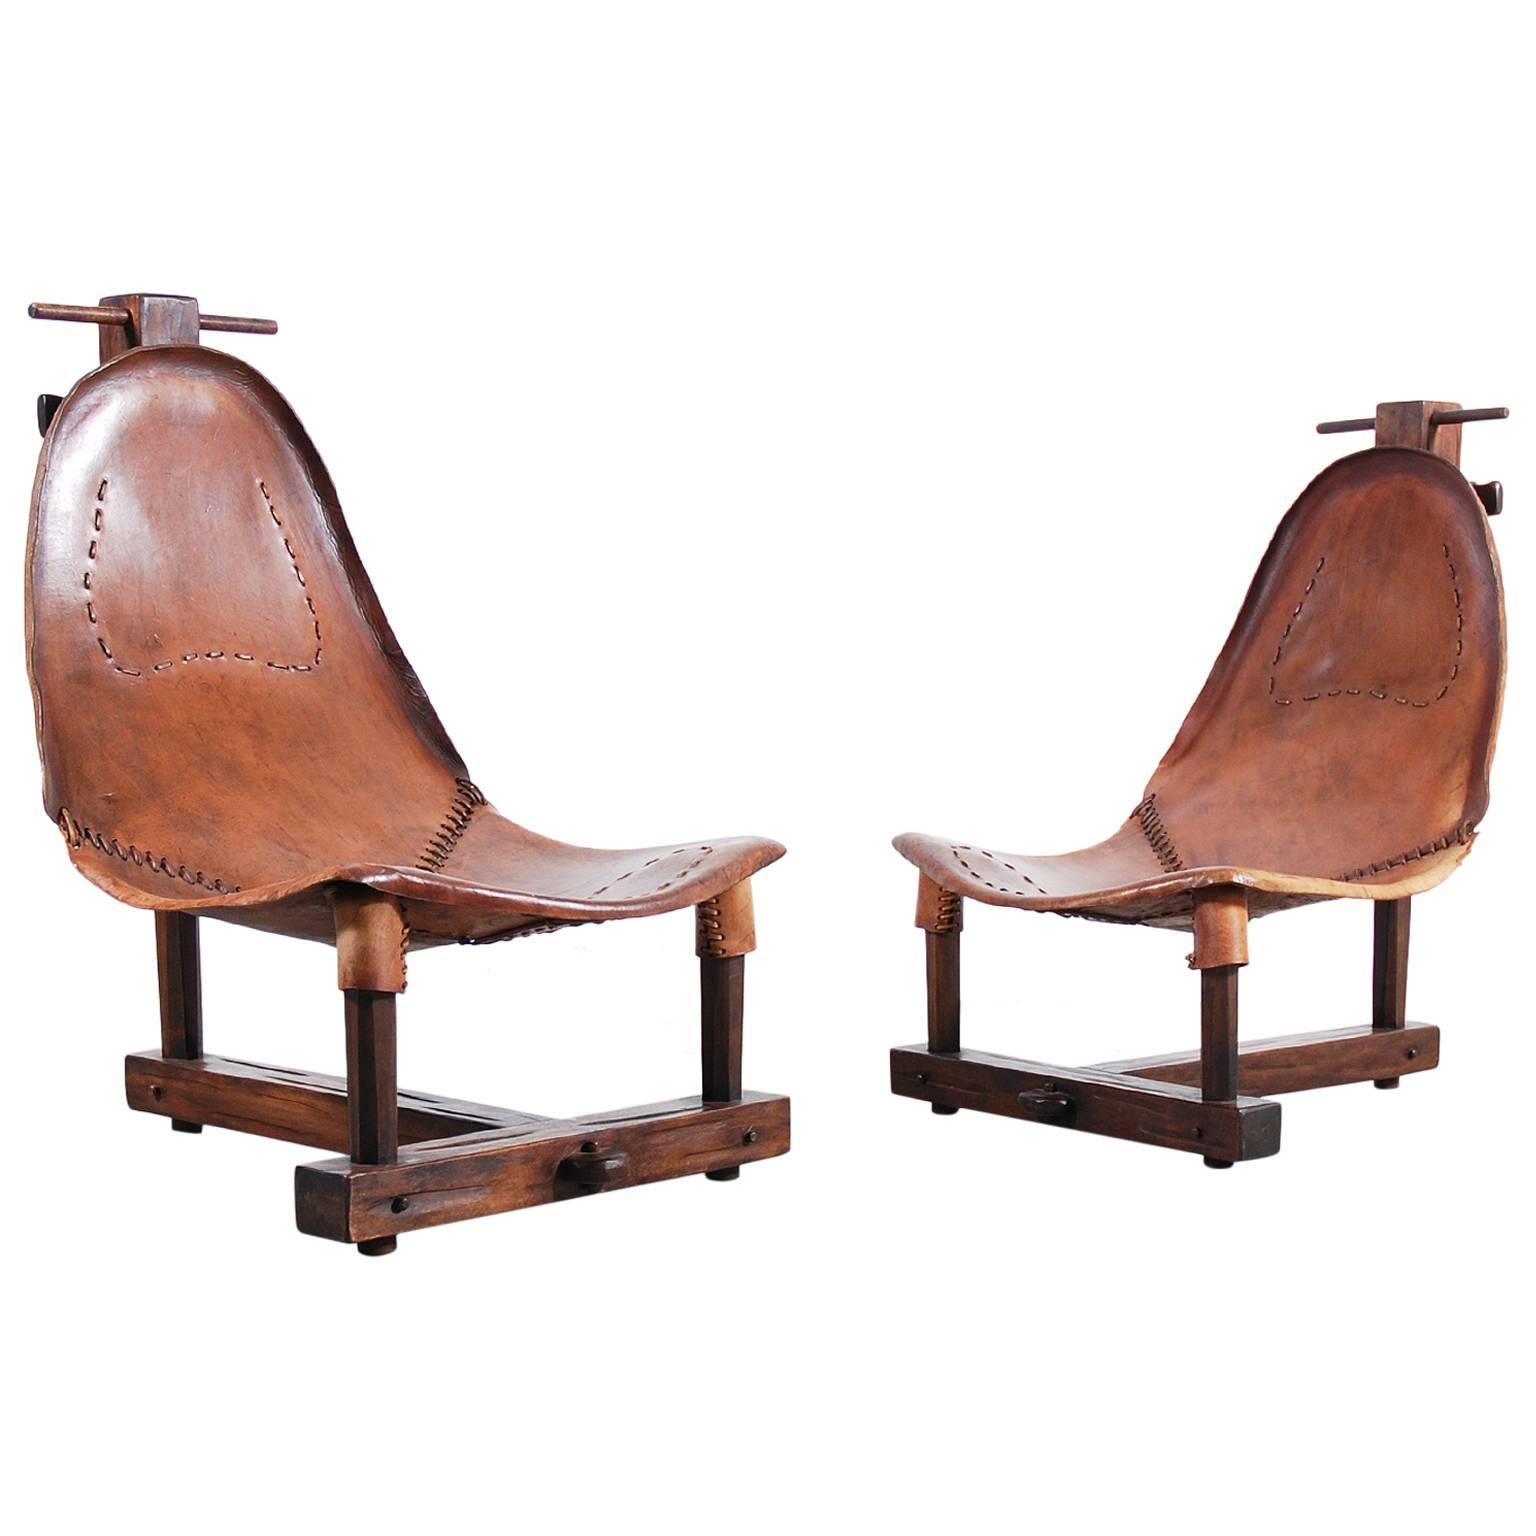 Unusual Pair of Leather Armchairs from 1950